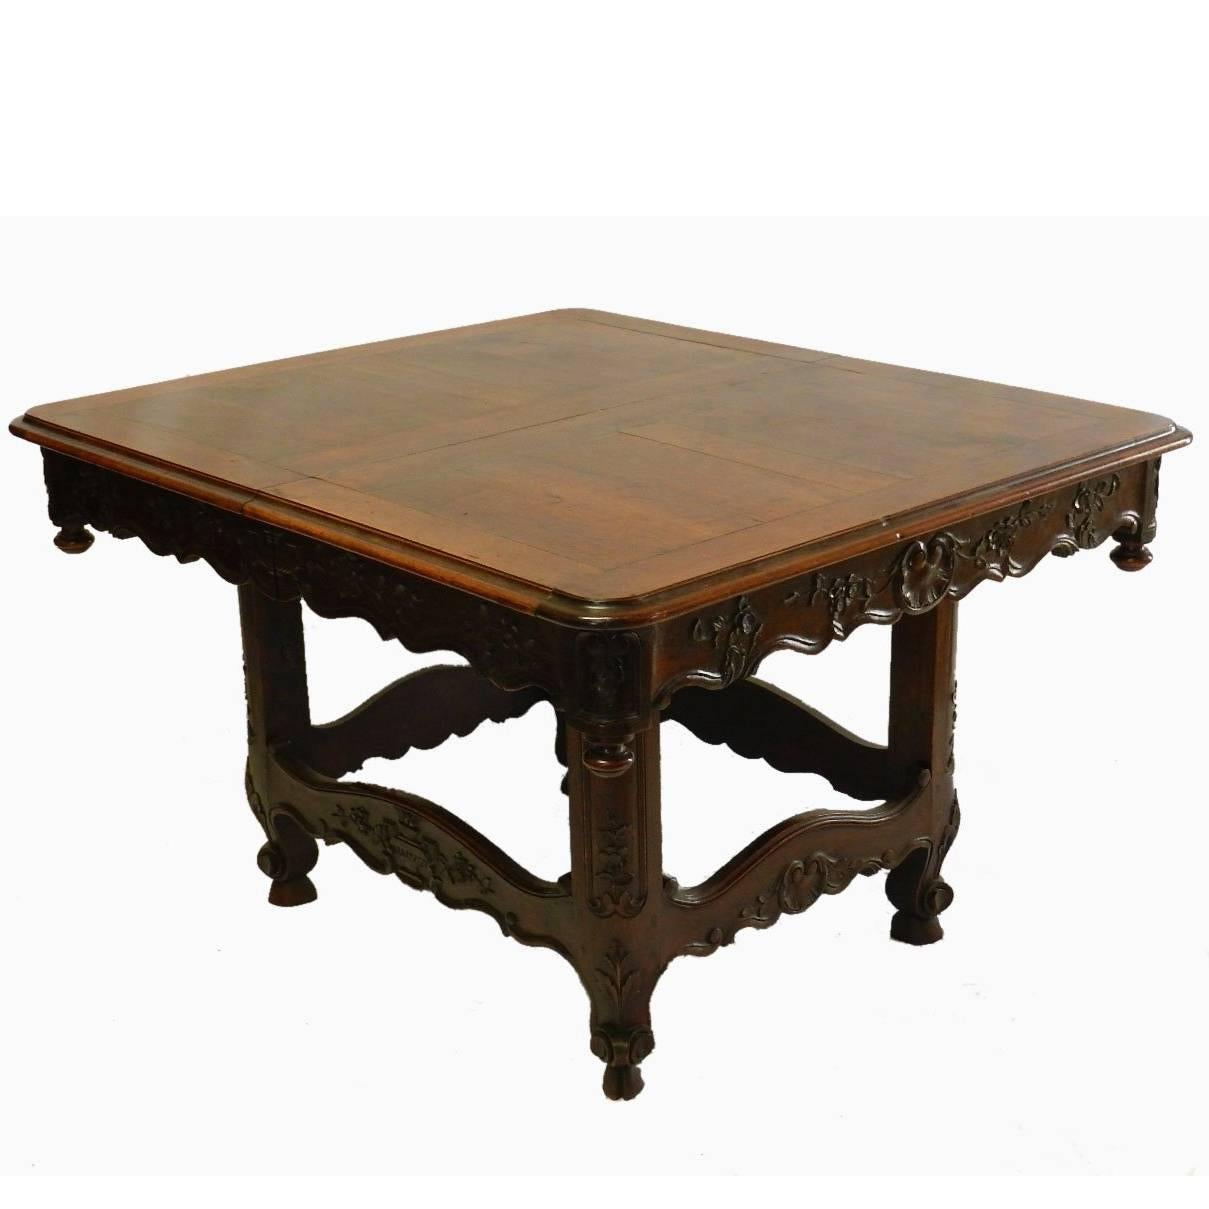 French, Provincial Dining Table Extending, Provencal, Louis Three Leaves